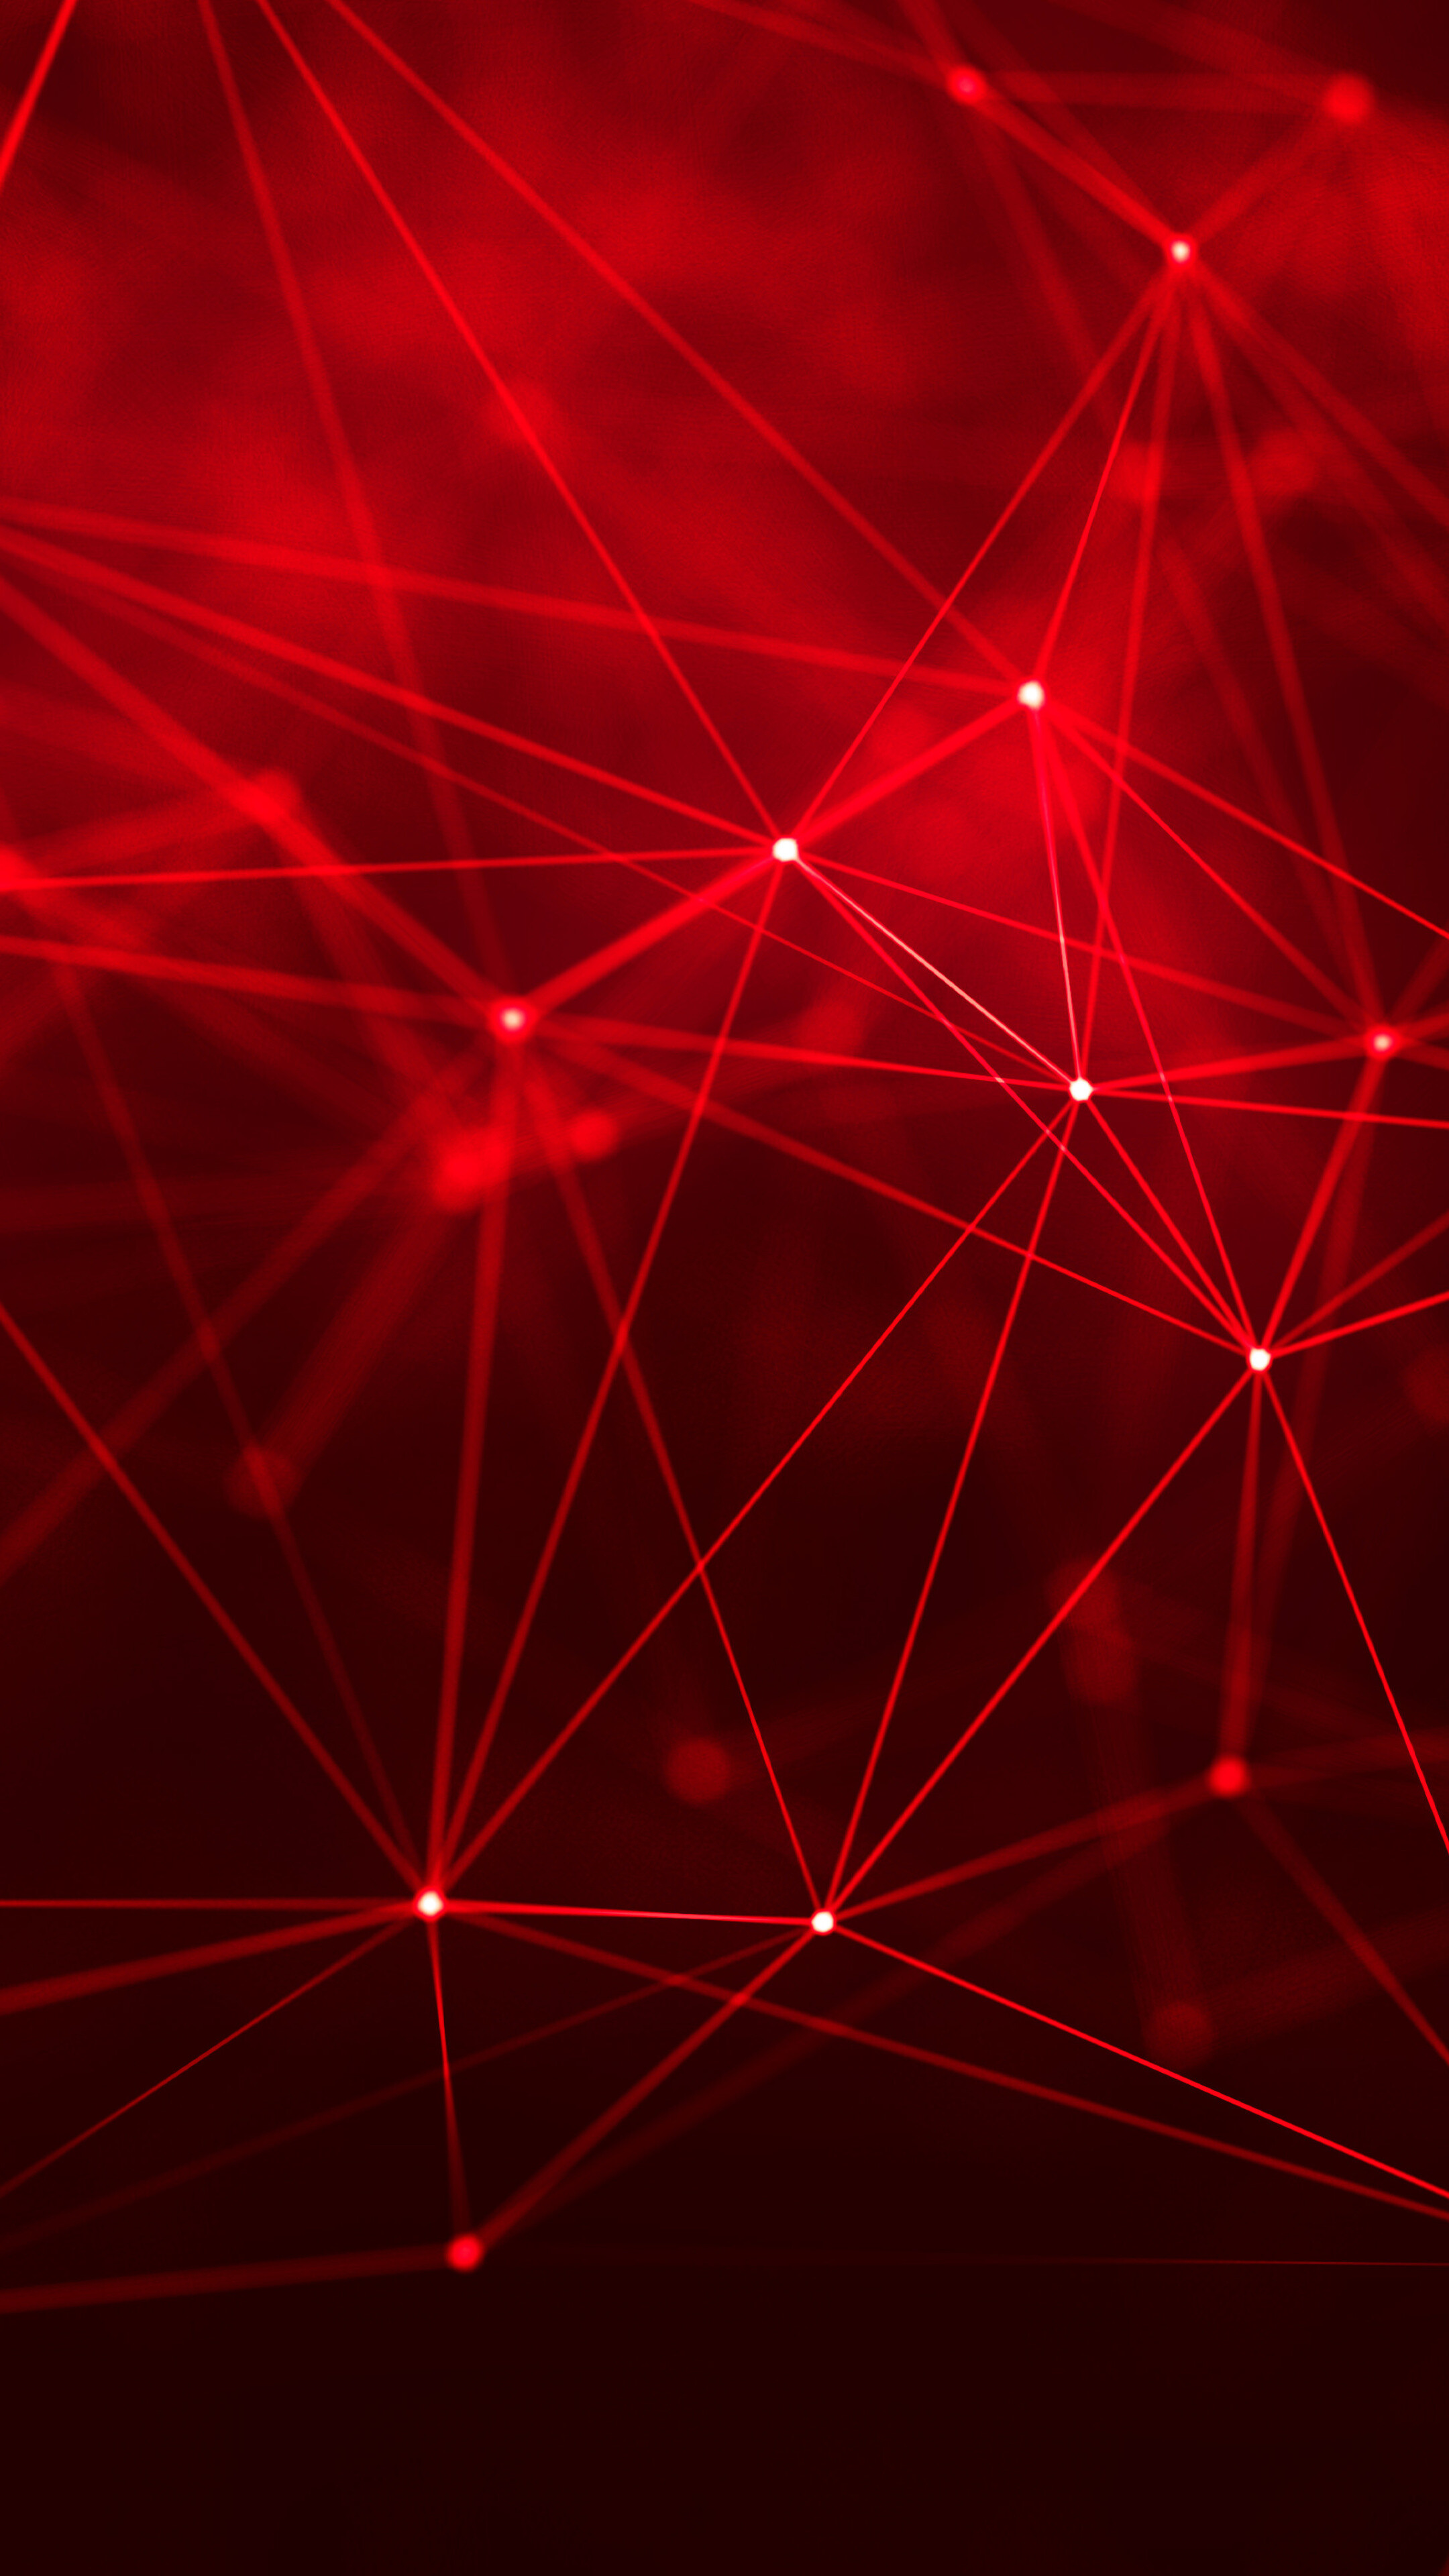 Geometric Abstract: Cyberspace, Reflex angles, Equilateral triangles. 2160x3840 4K Wallpaper.